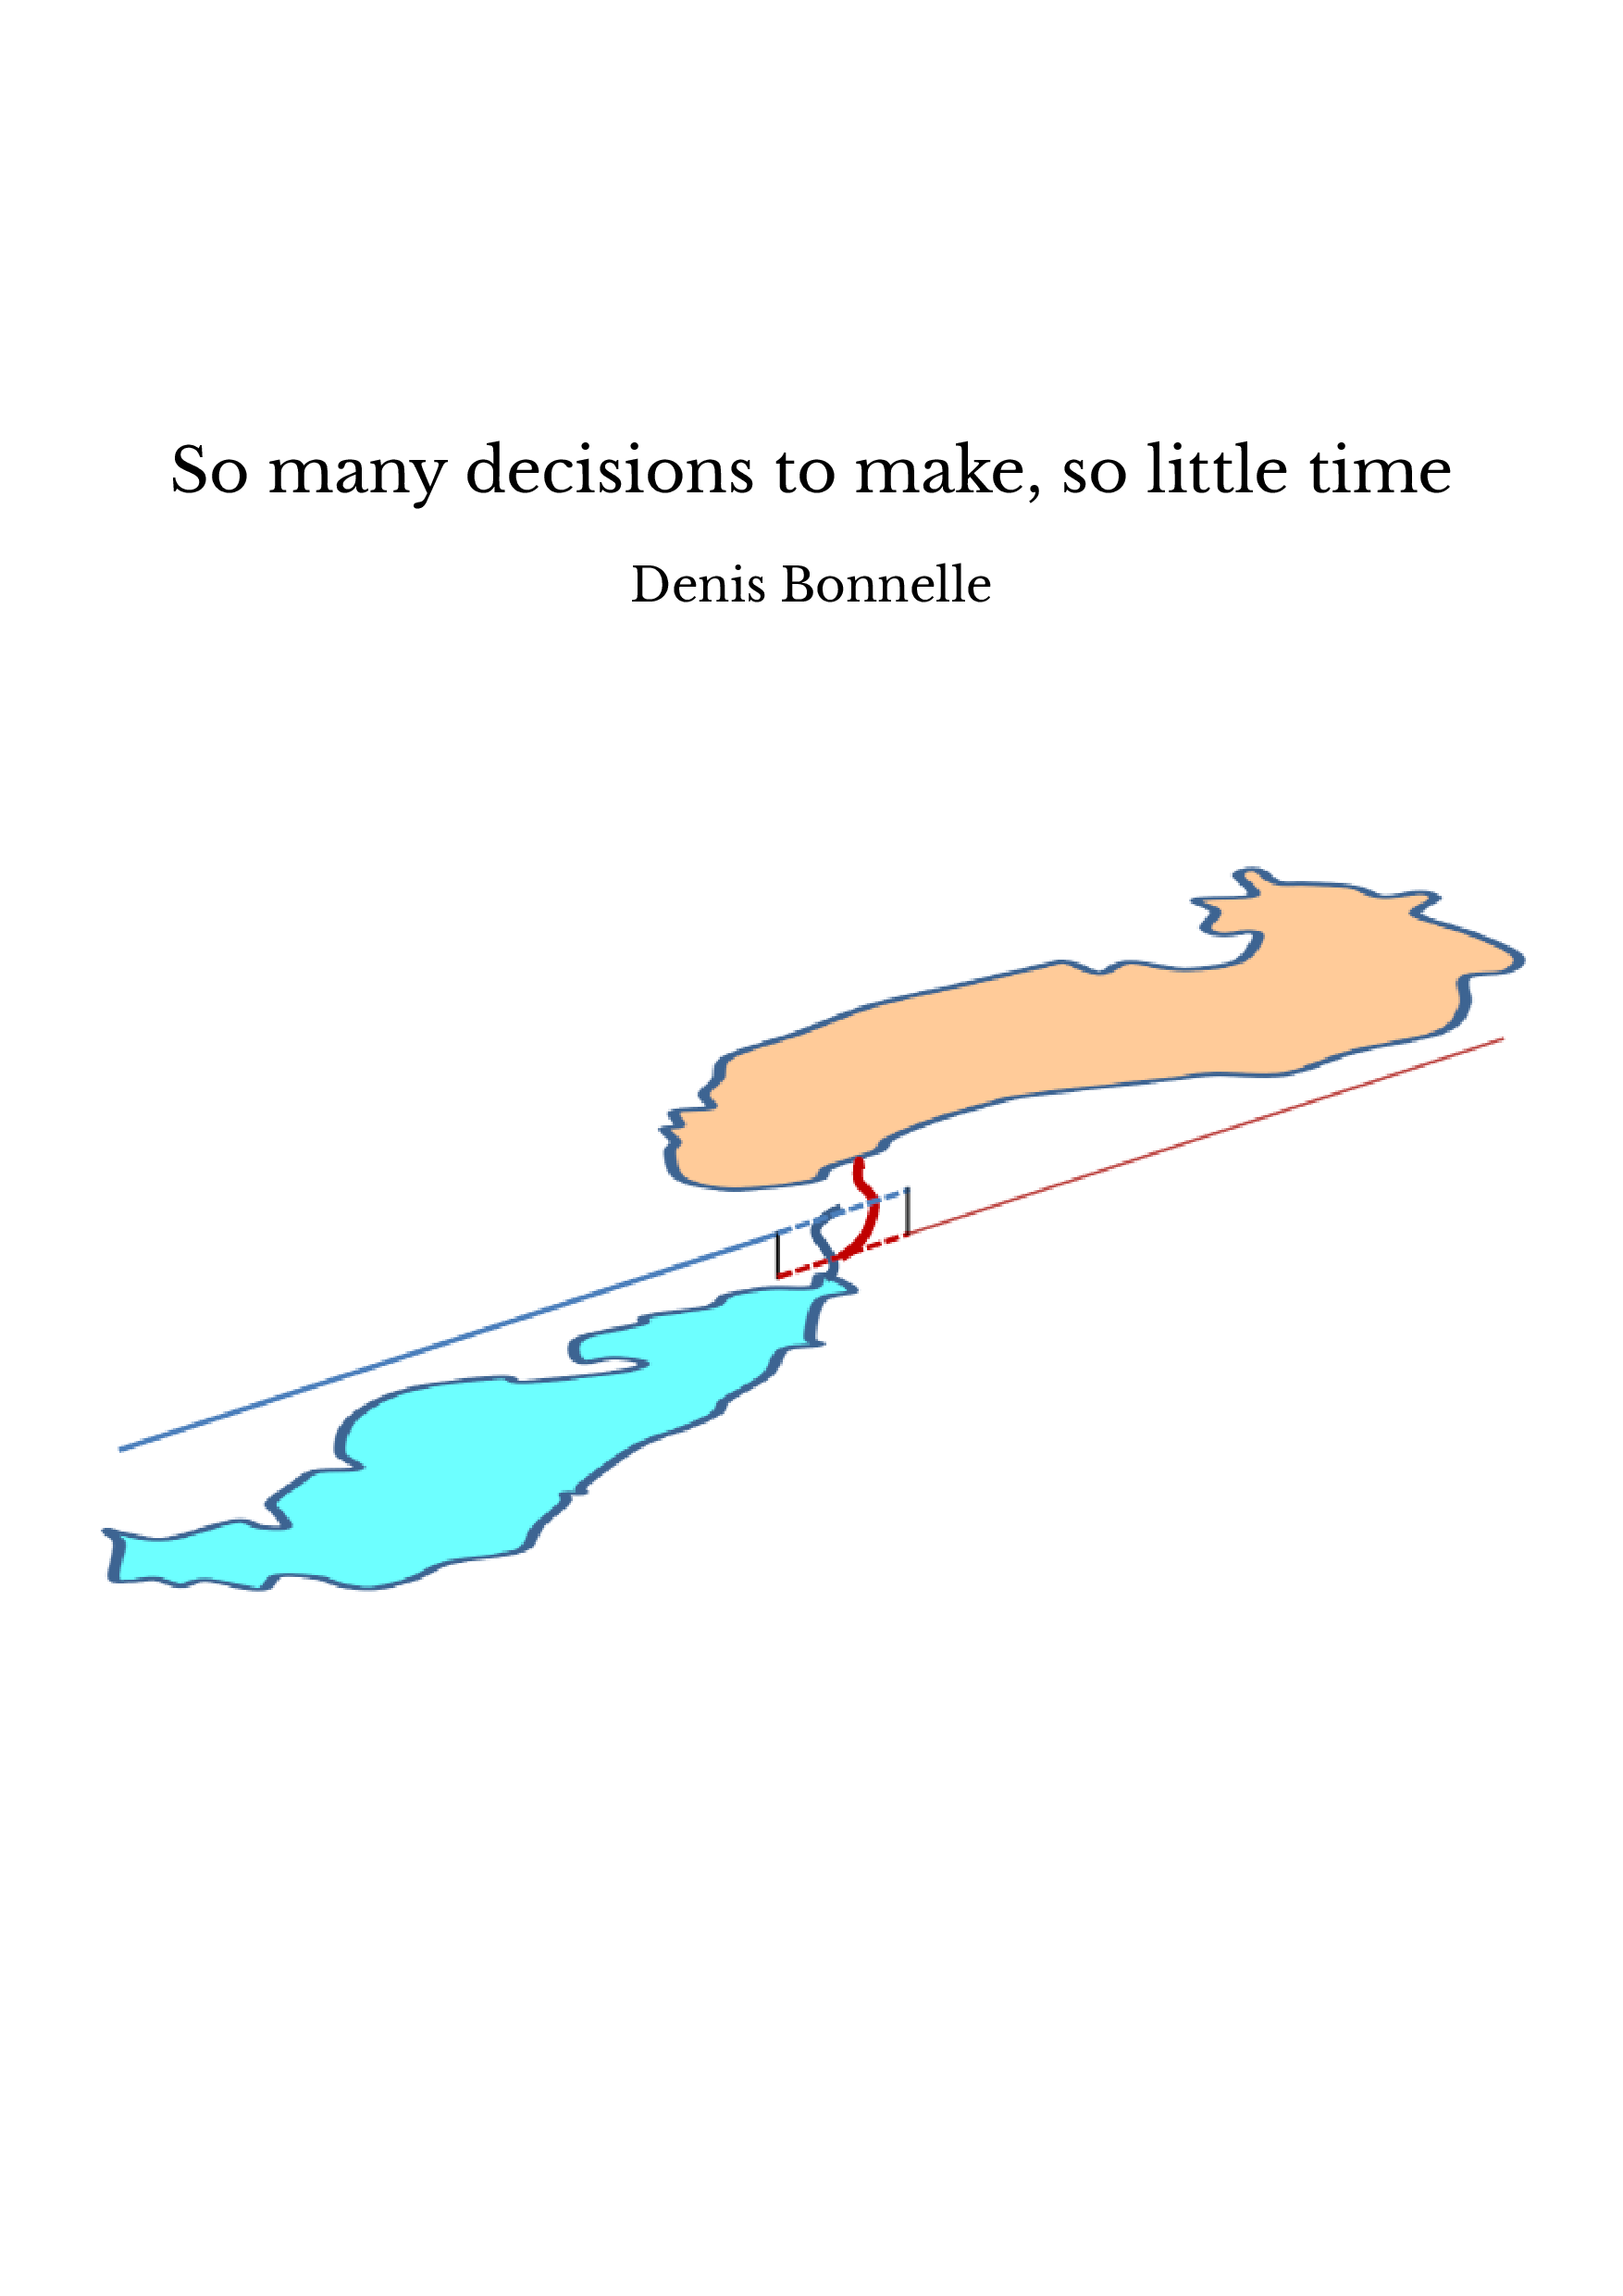 So many decisions to make, so little time